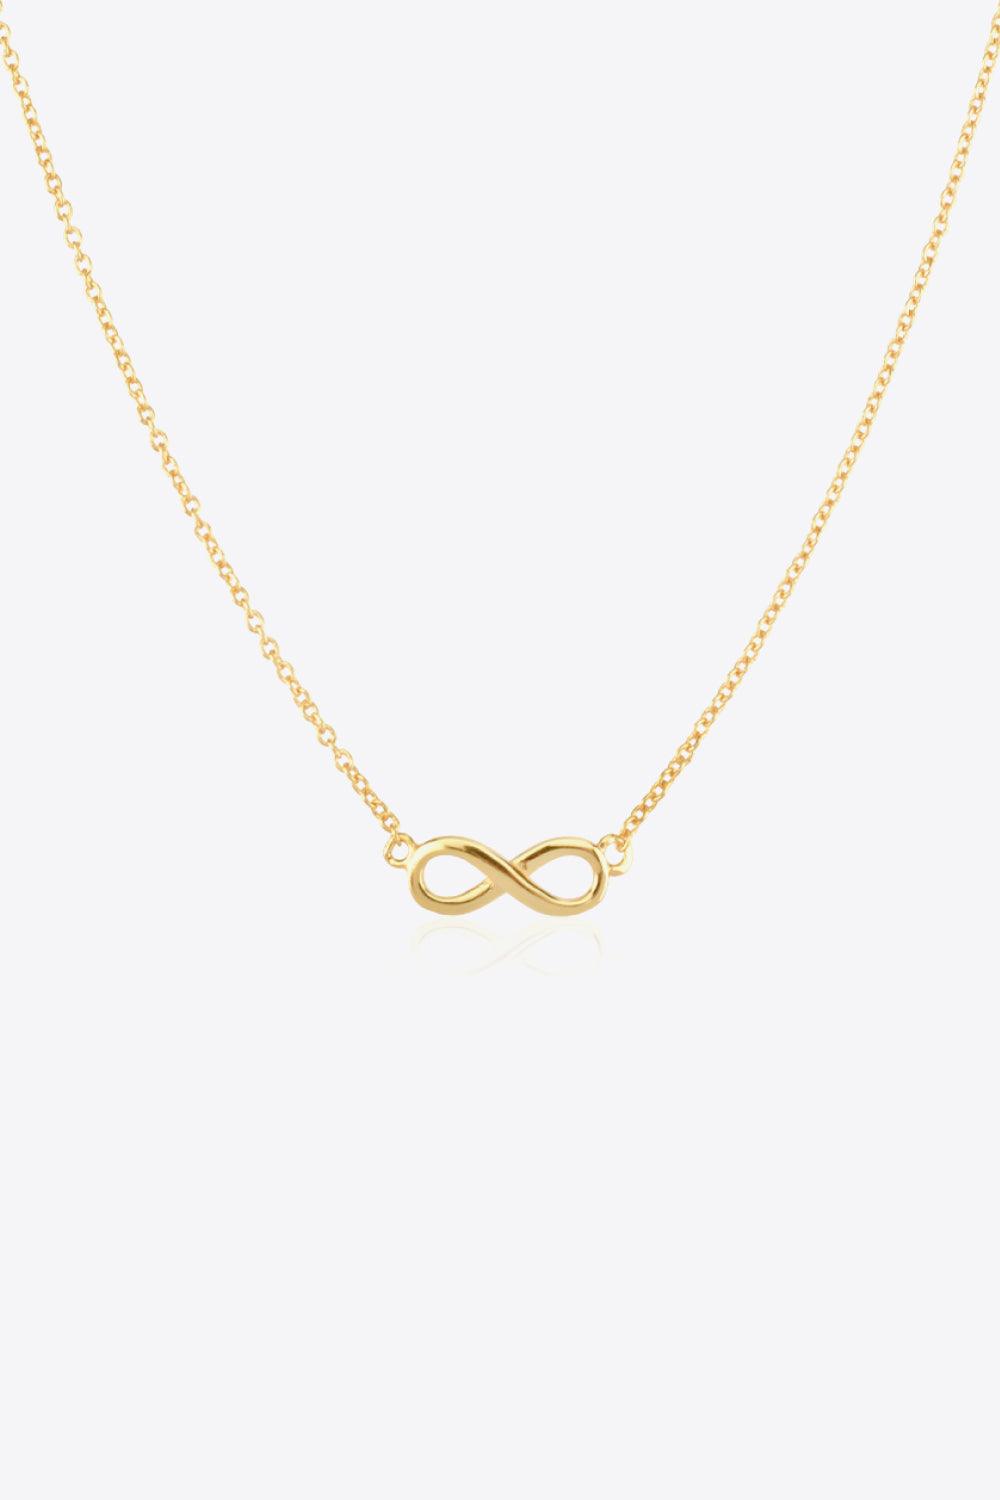 Infinity Loop 925 Sterling Silver Necklace - God's Girl Gifts And Apparel